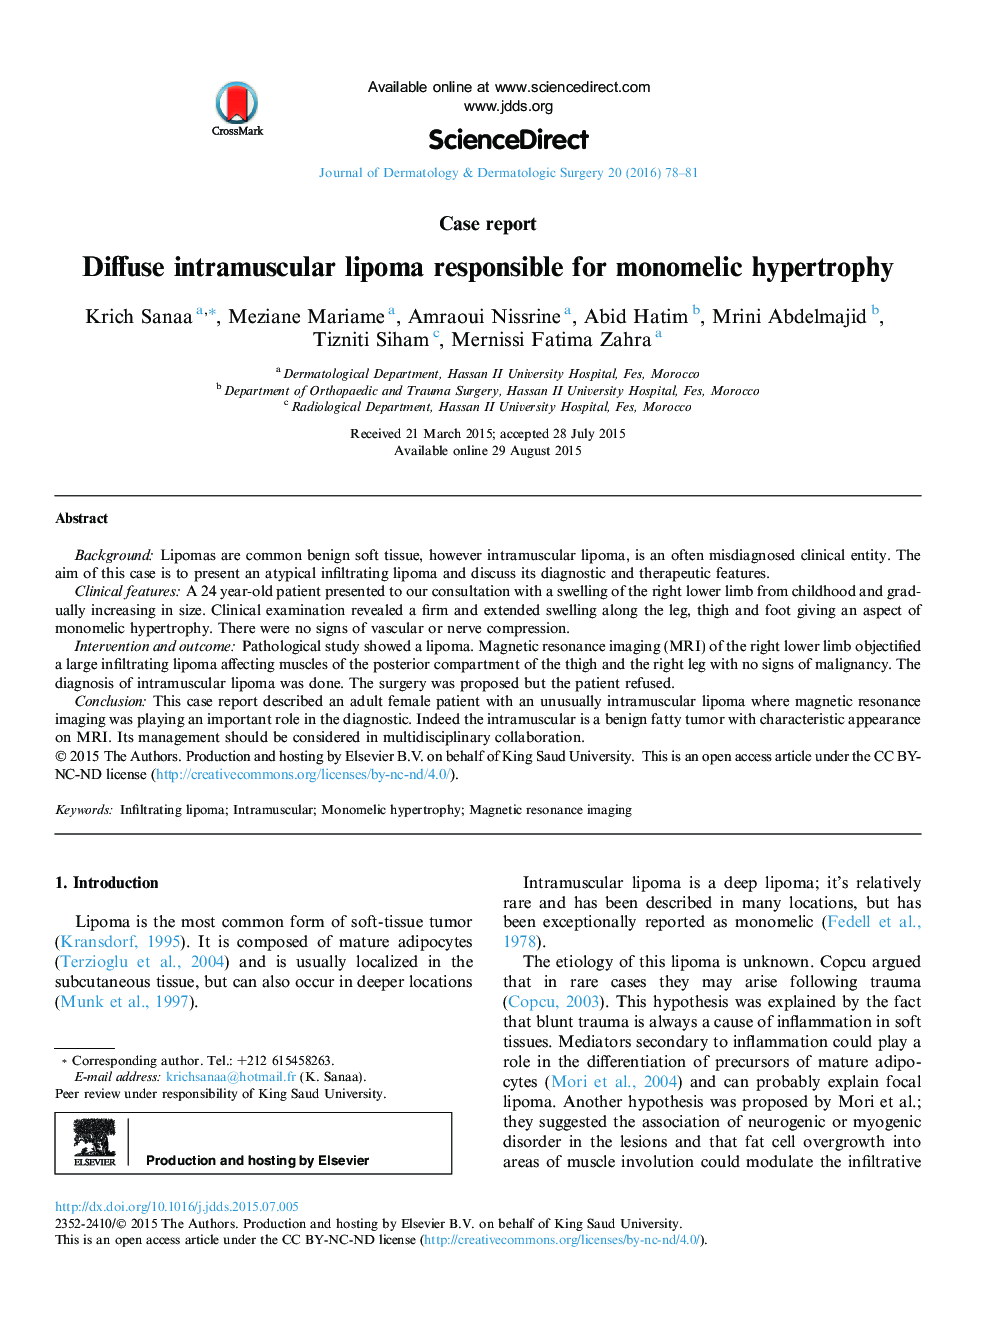 Diffuse intramuscular lipoma responsible for monomelic hypertrophy 